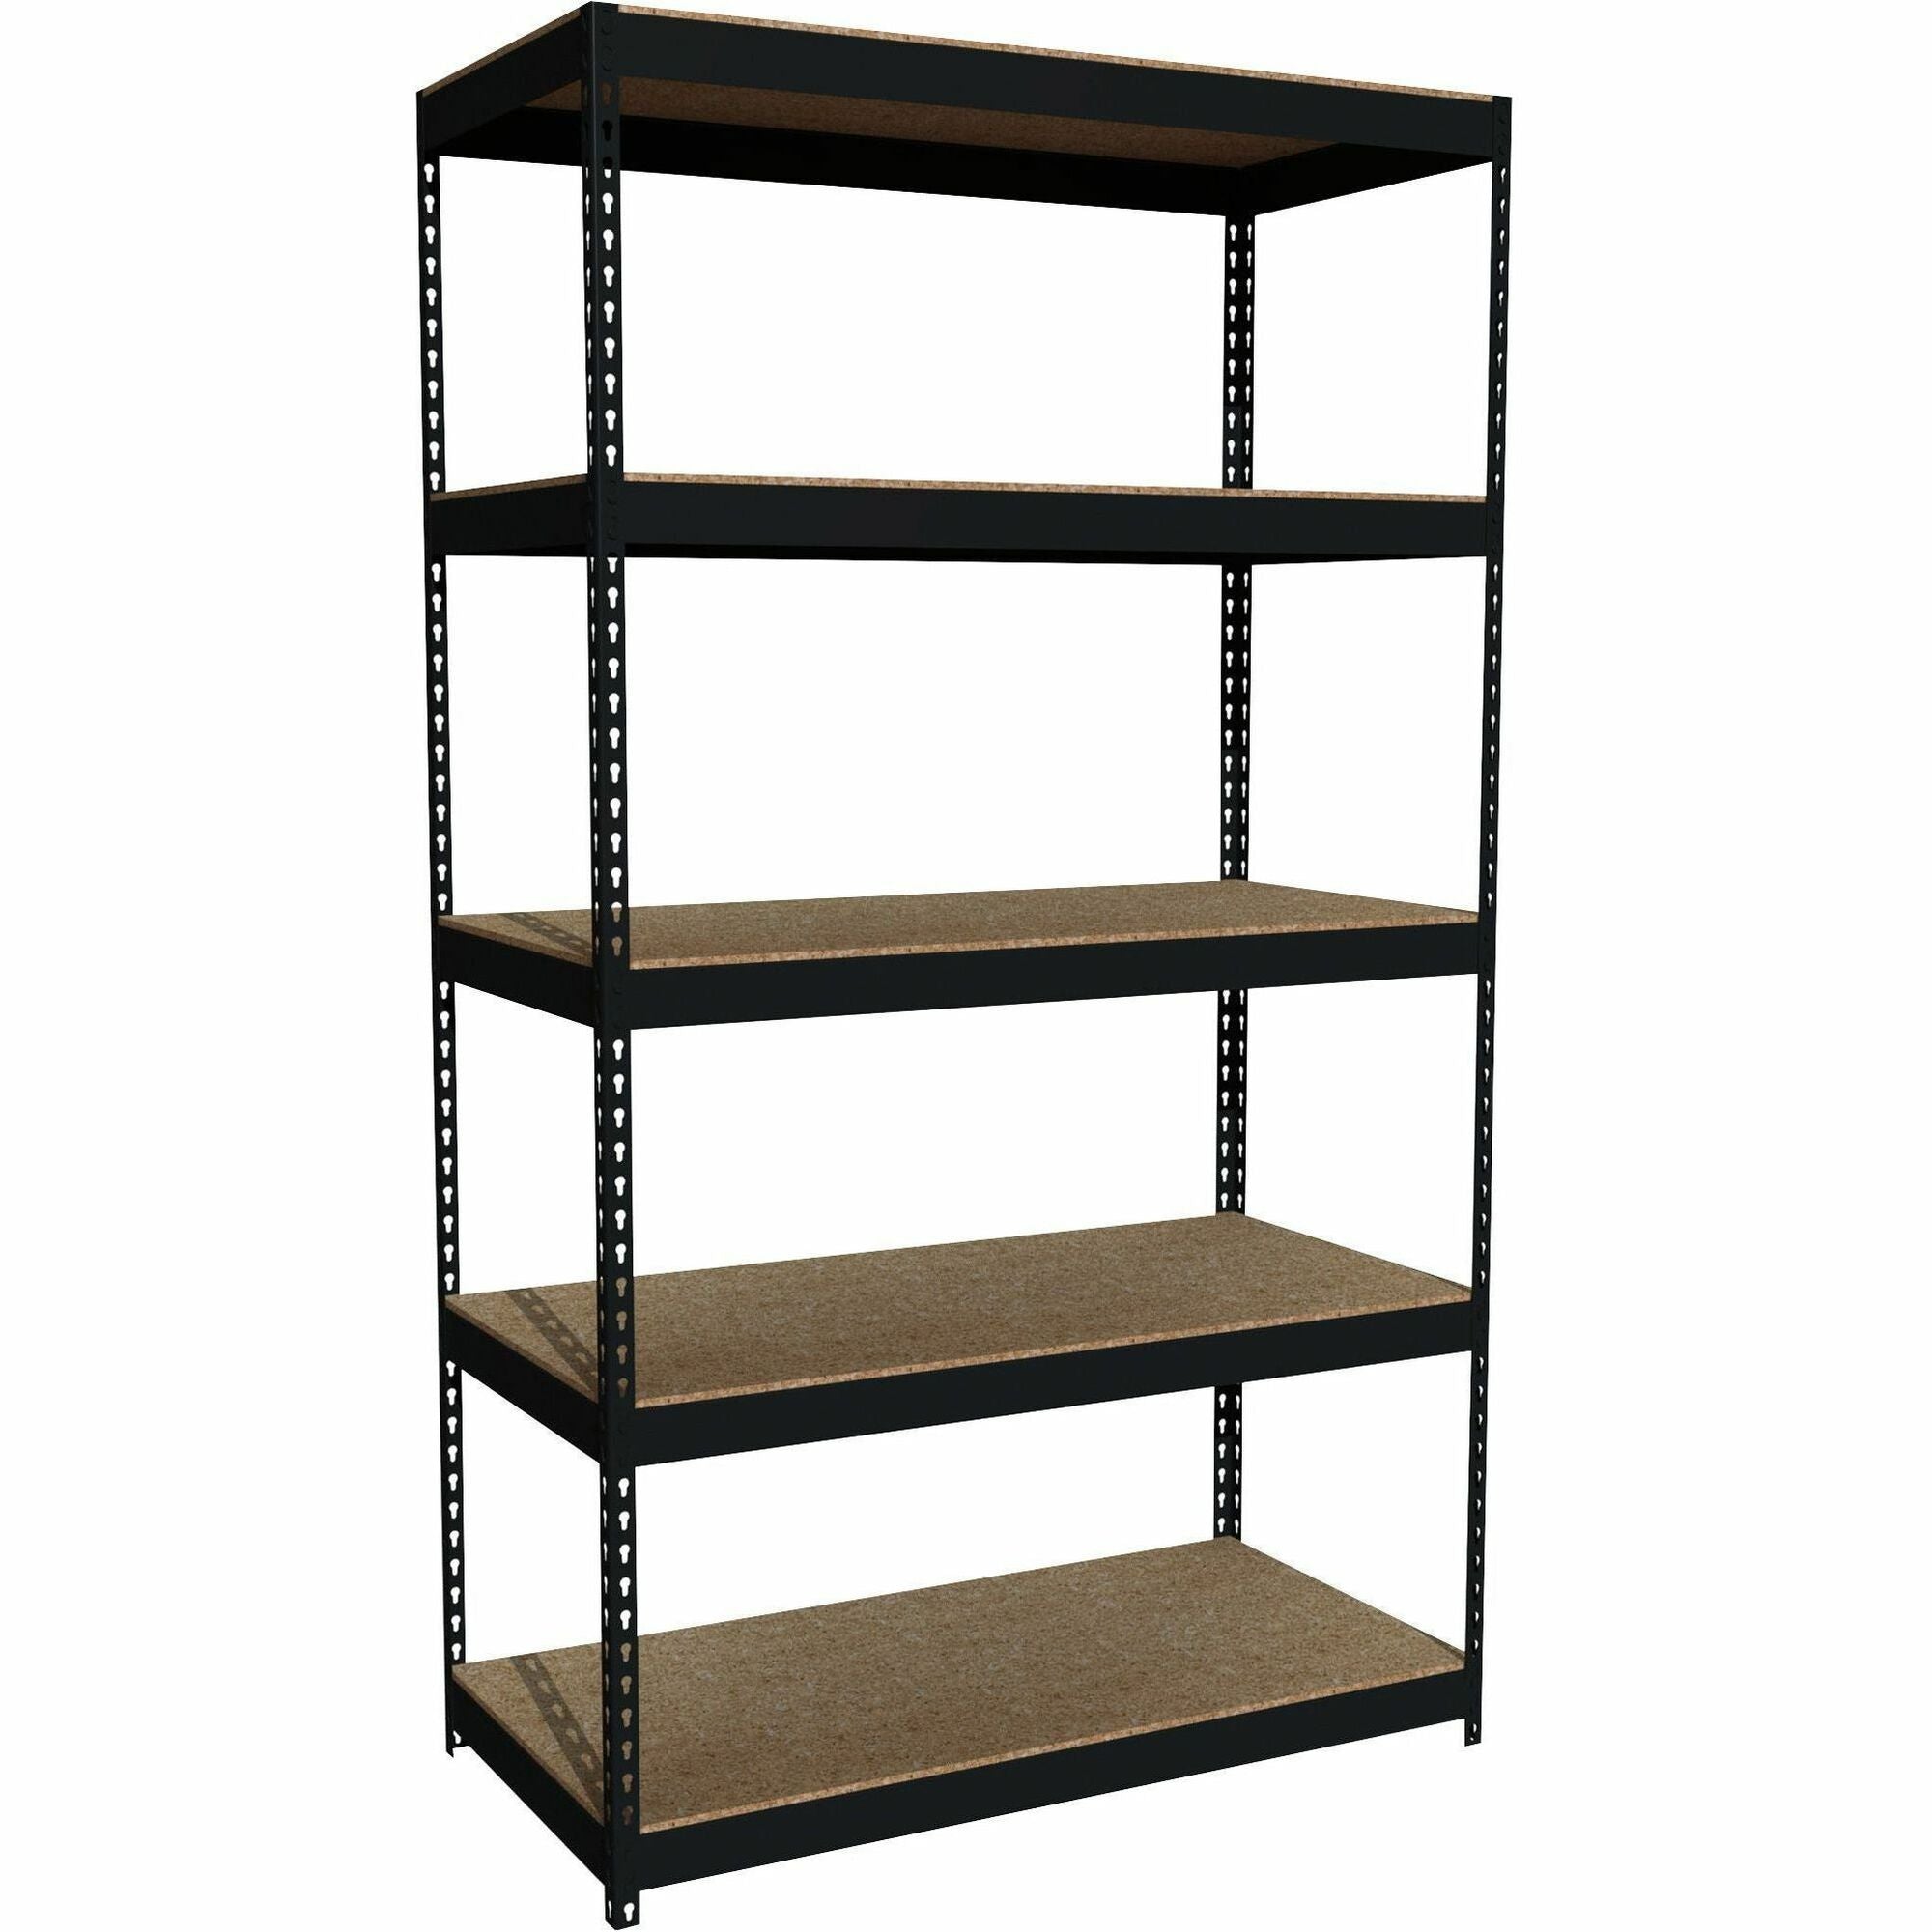 Lorell Fortress Riveted Shelving - 5 Compartment(s) - 5 Shelf(ves) - 84" Height x 48" Width x 24" Depth - Heavy Duty, Rust Resistant - 28% Recycled - Powder Coated - Black - Steel - 1 Each - 